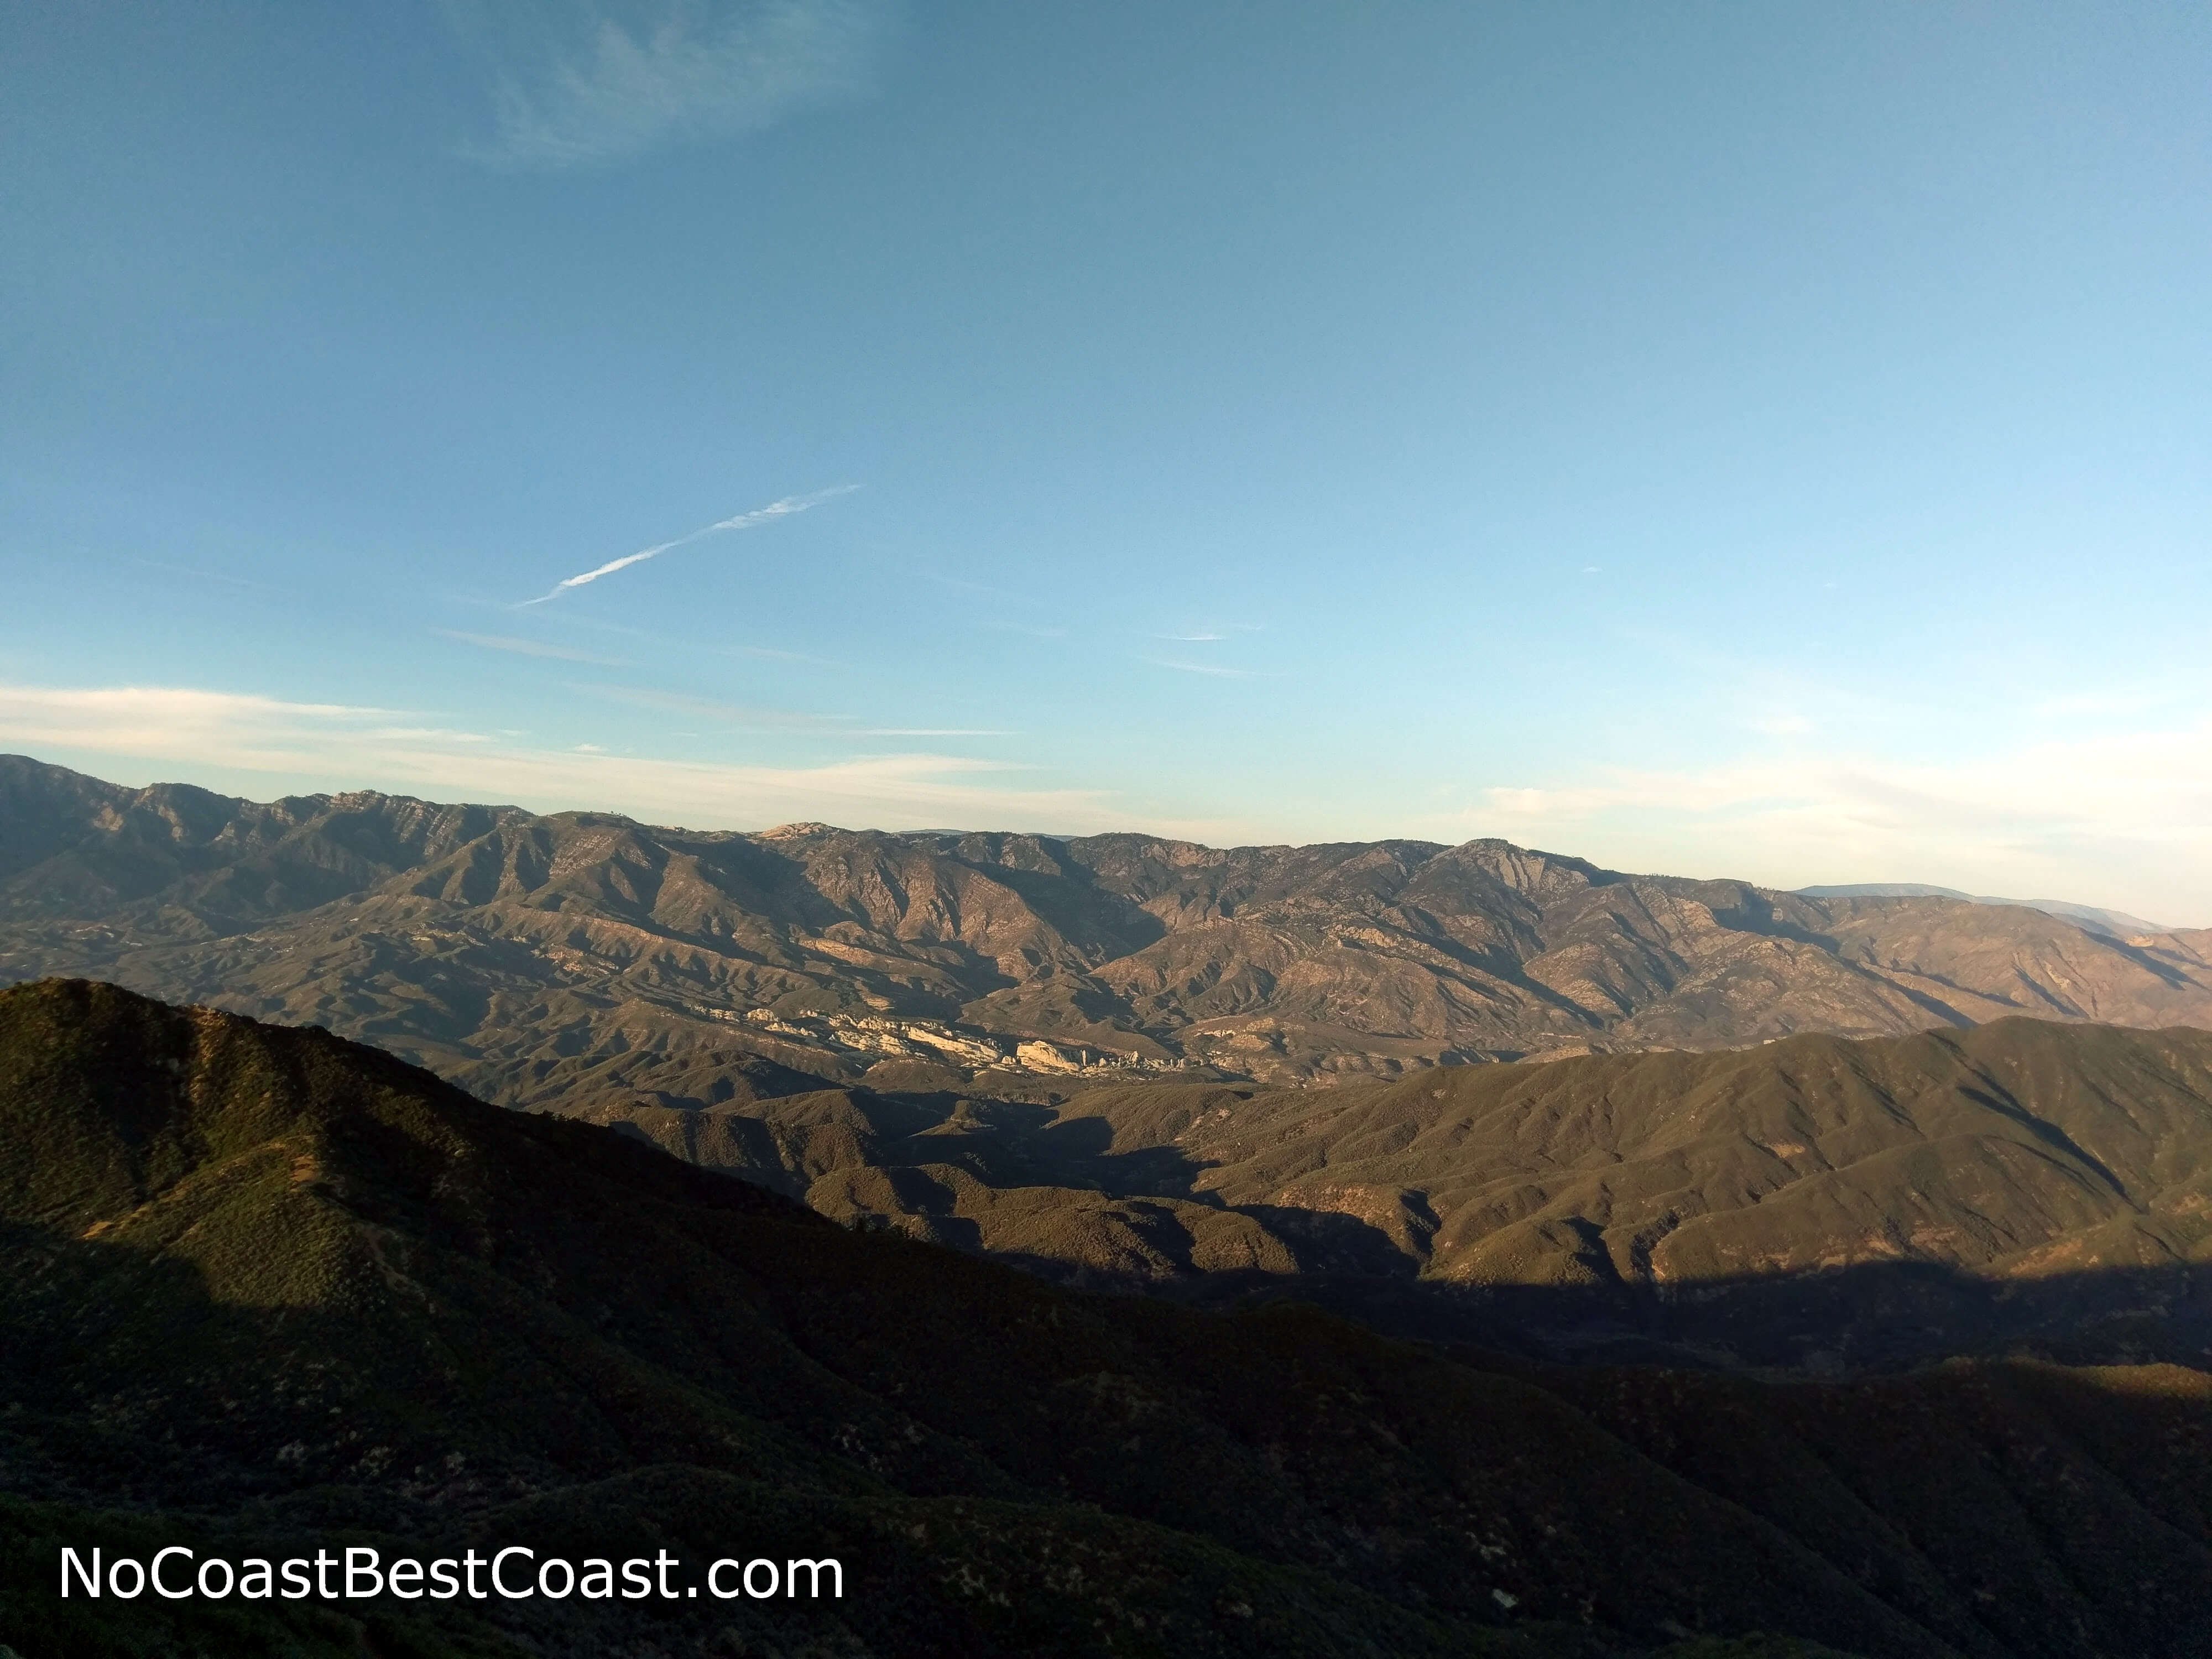 The beautiful green topography of the Los Padres National Forest